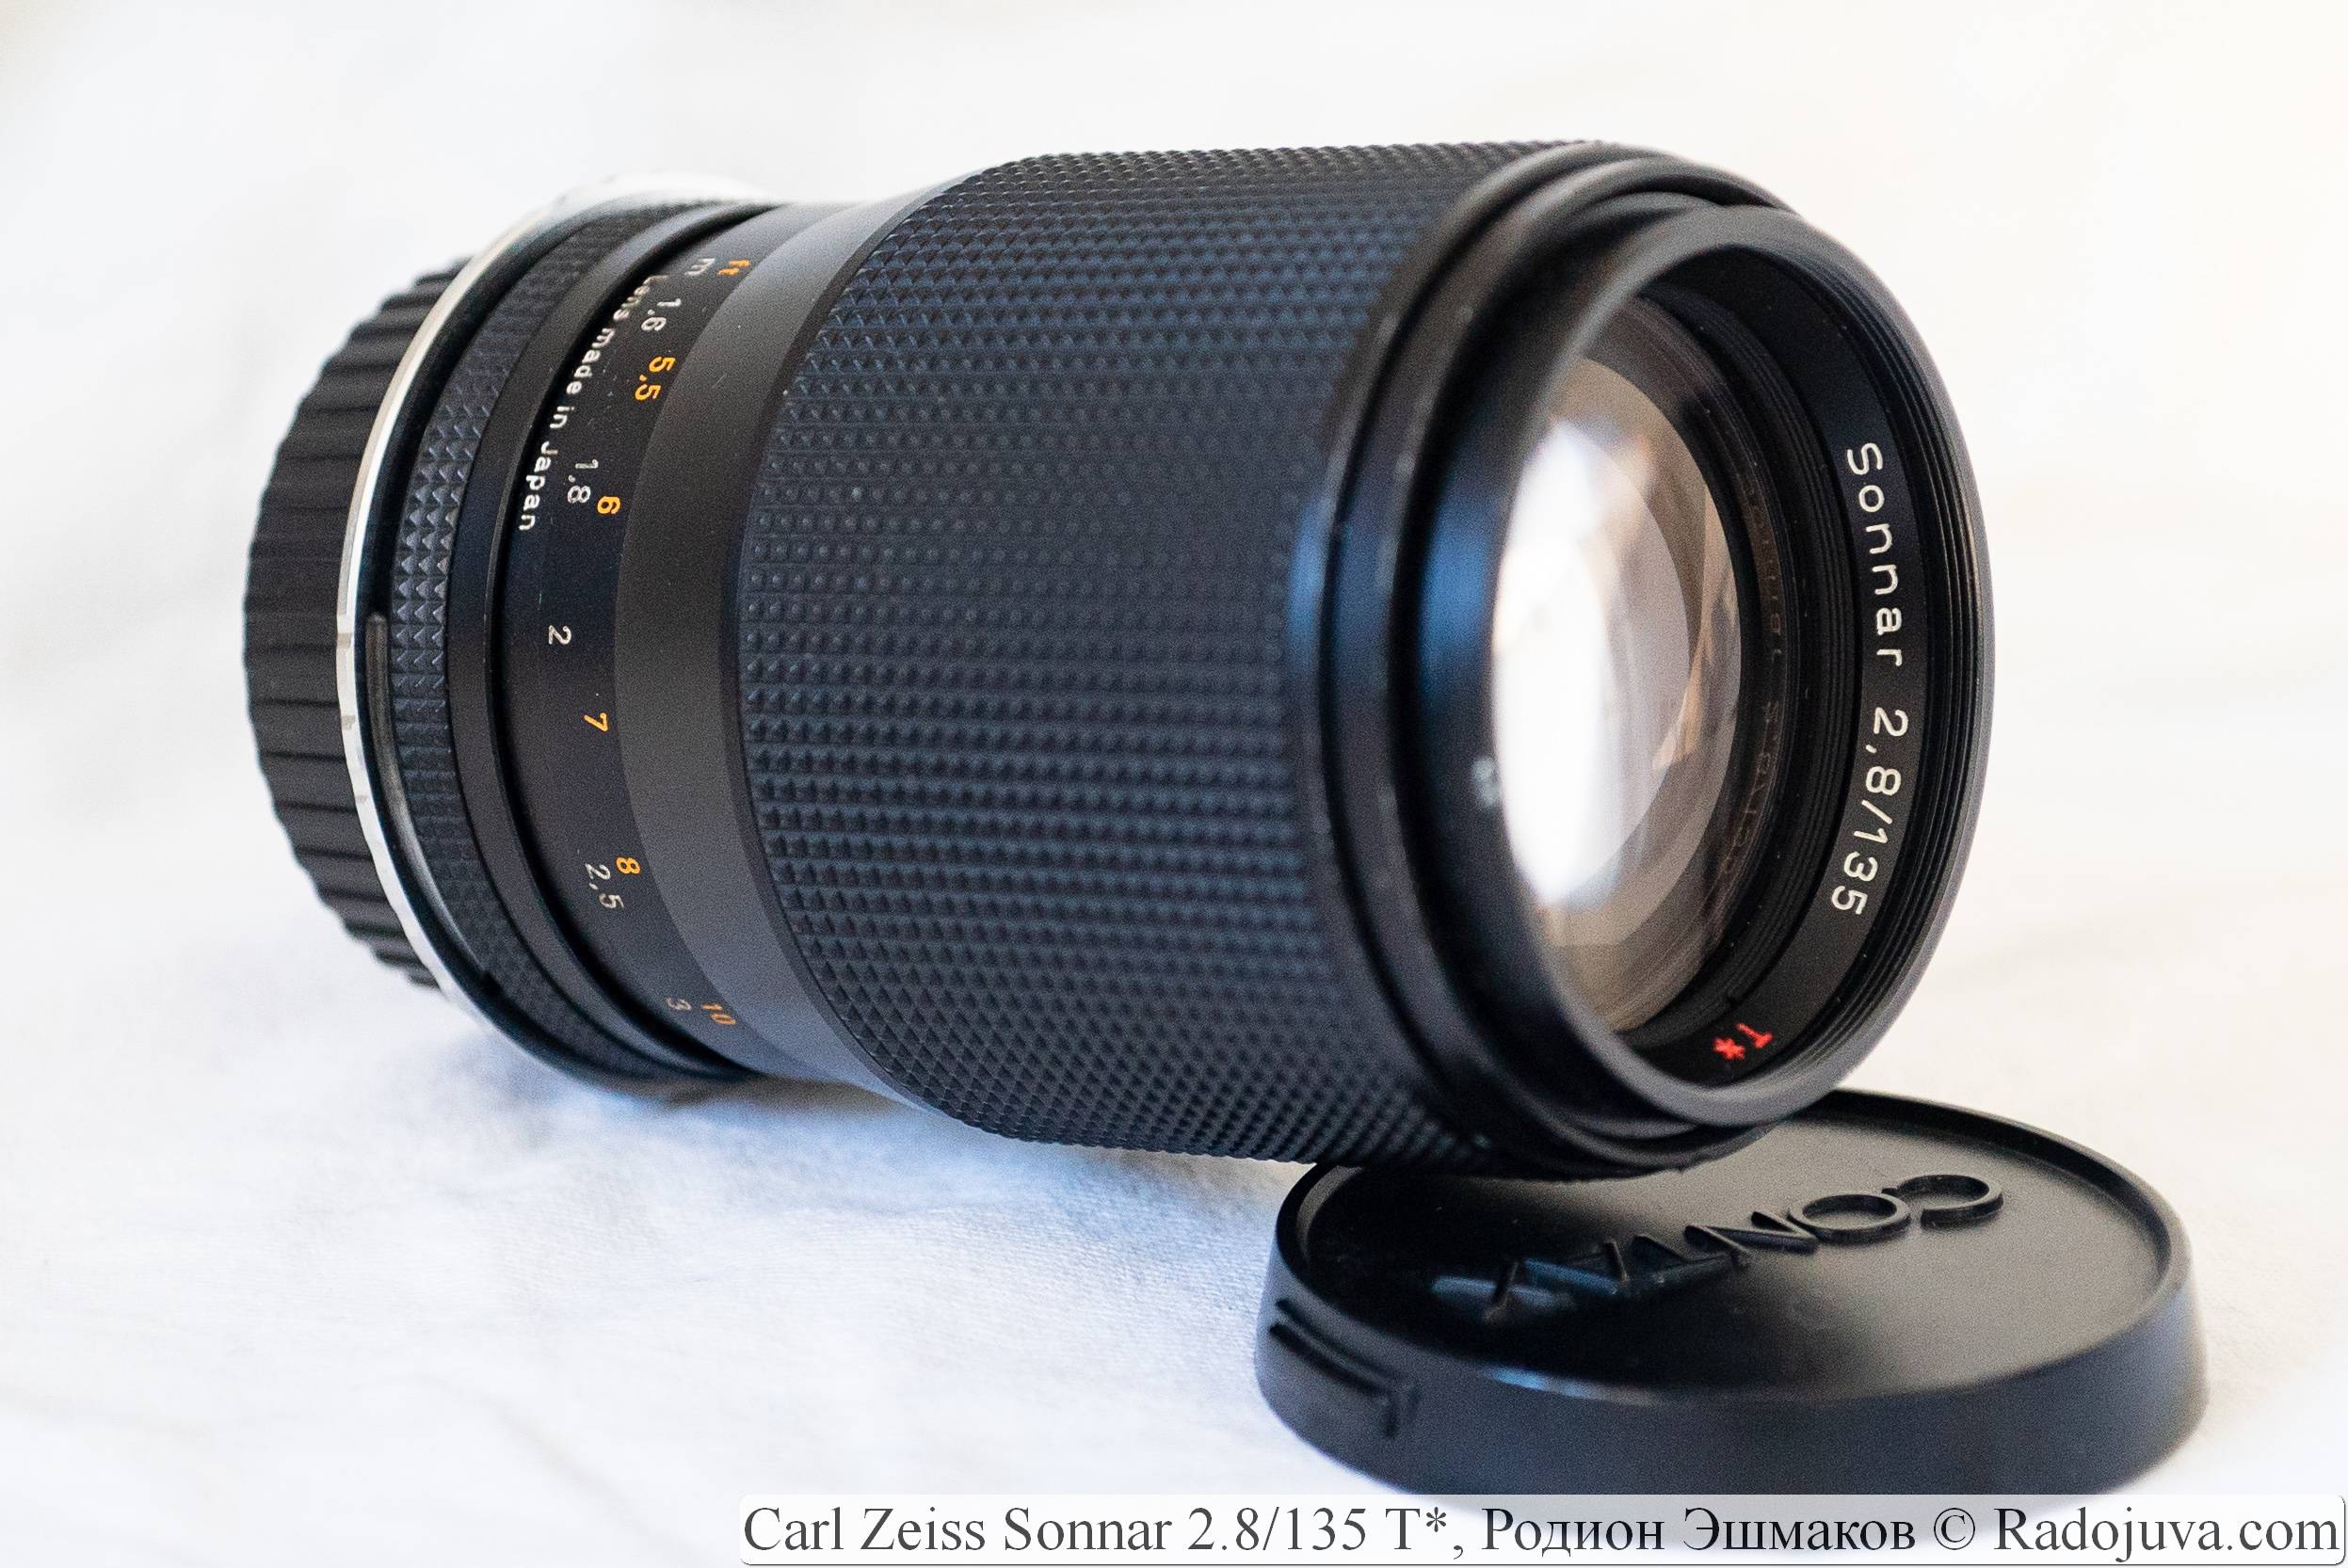 Carl Zeiss Sonnar 135/2.8 when focusing on infinity.